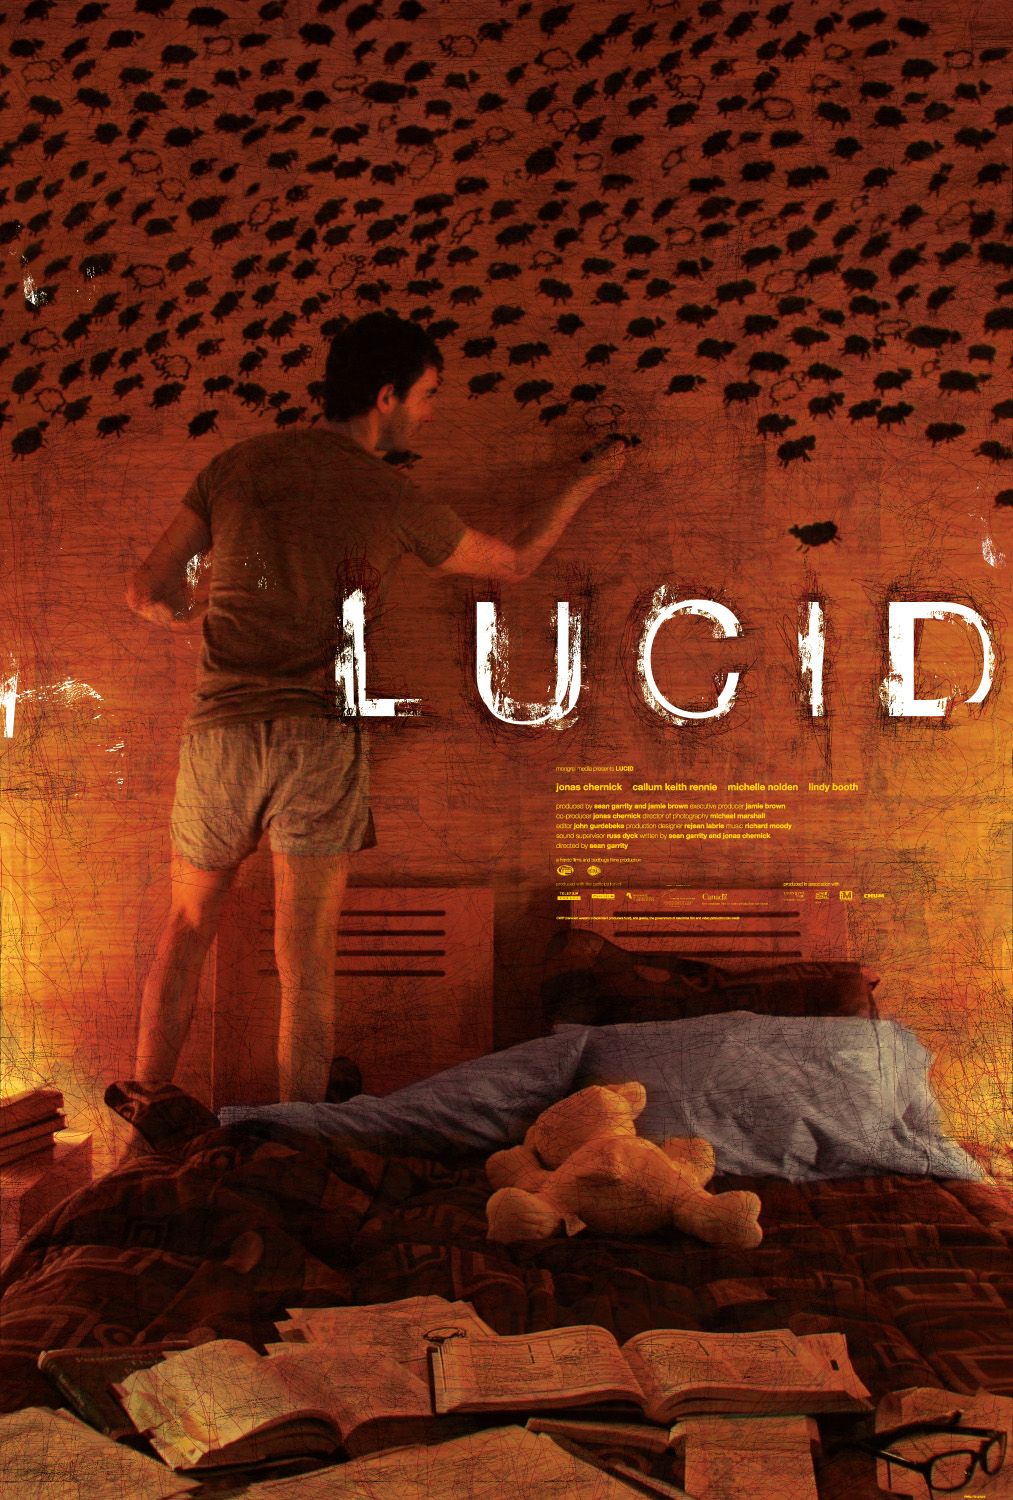 Return to Main Page for Lucid Posters